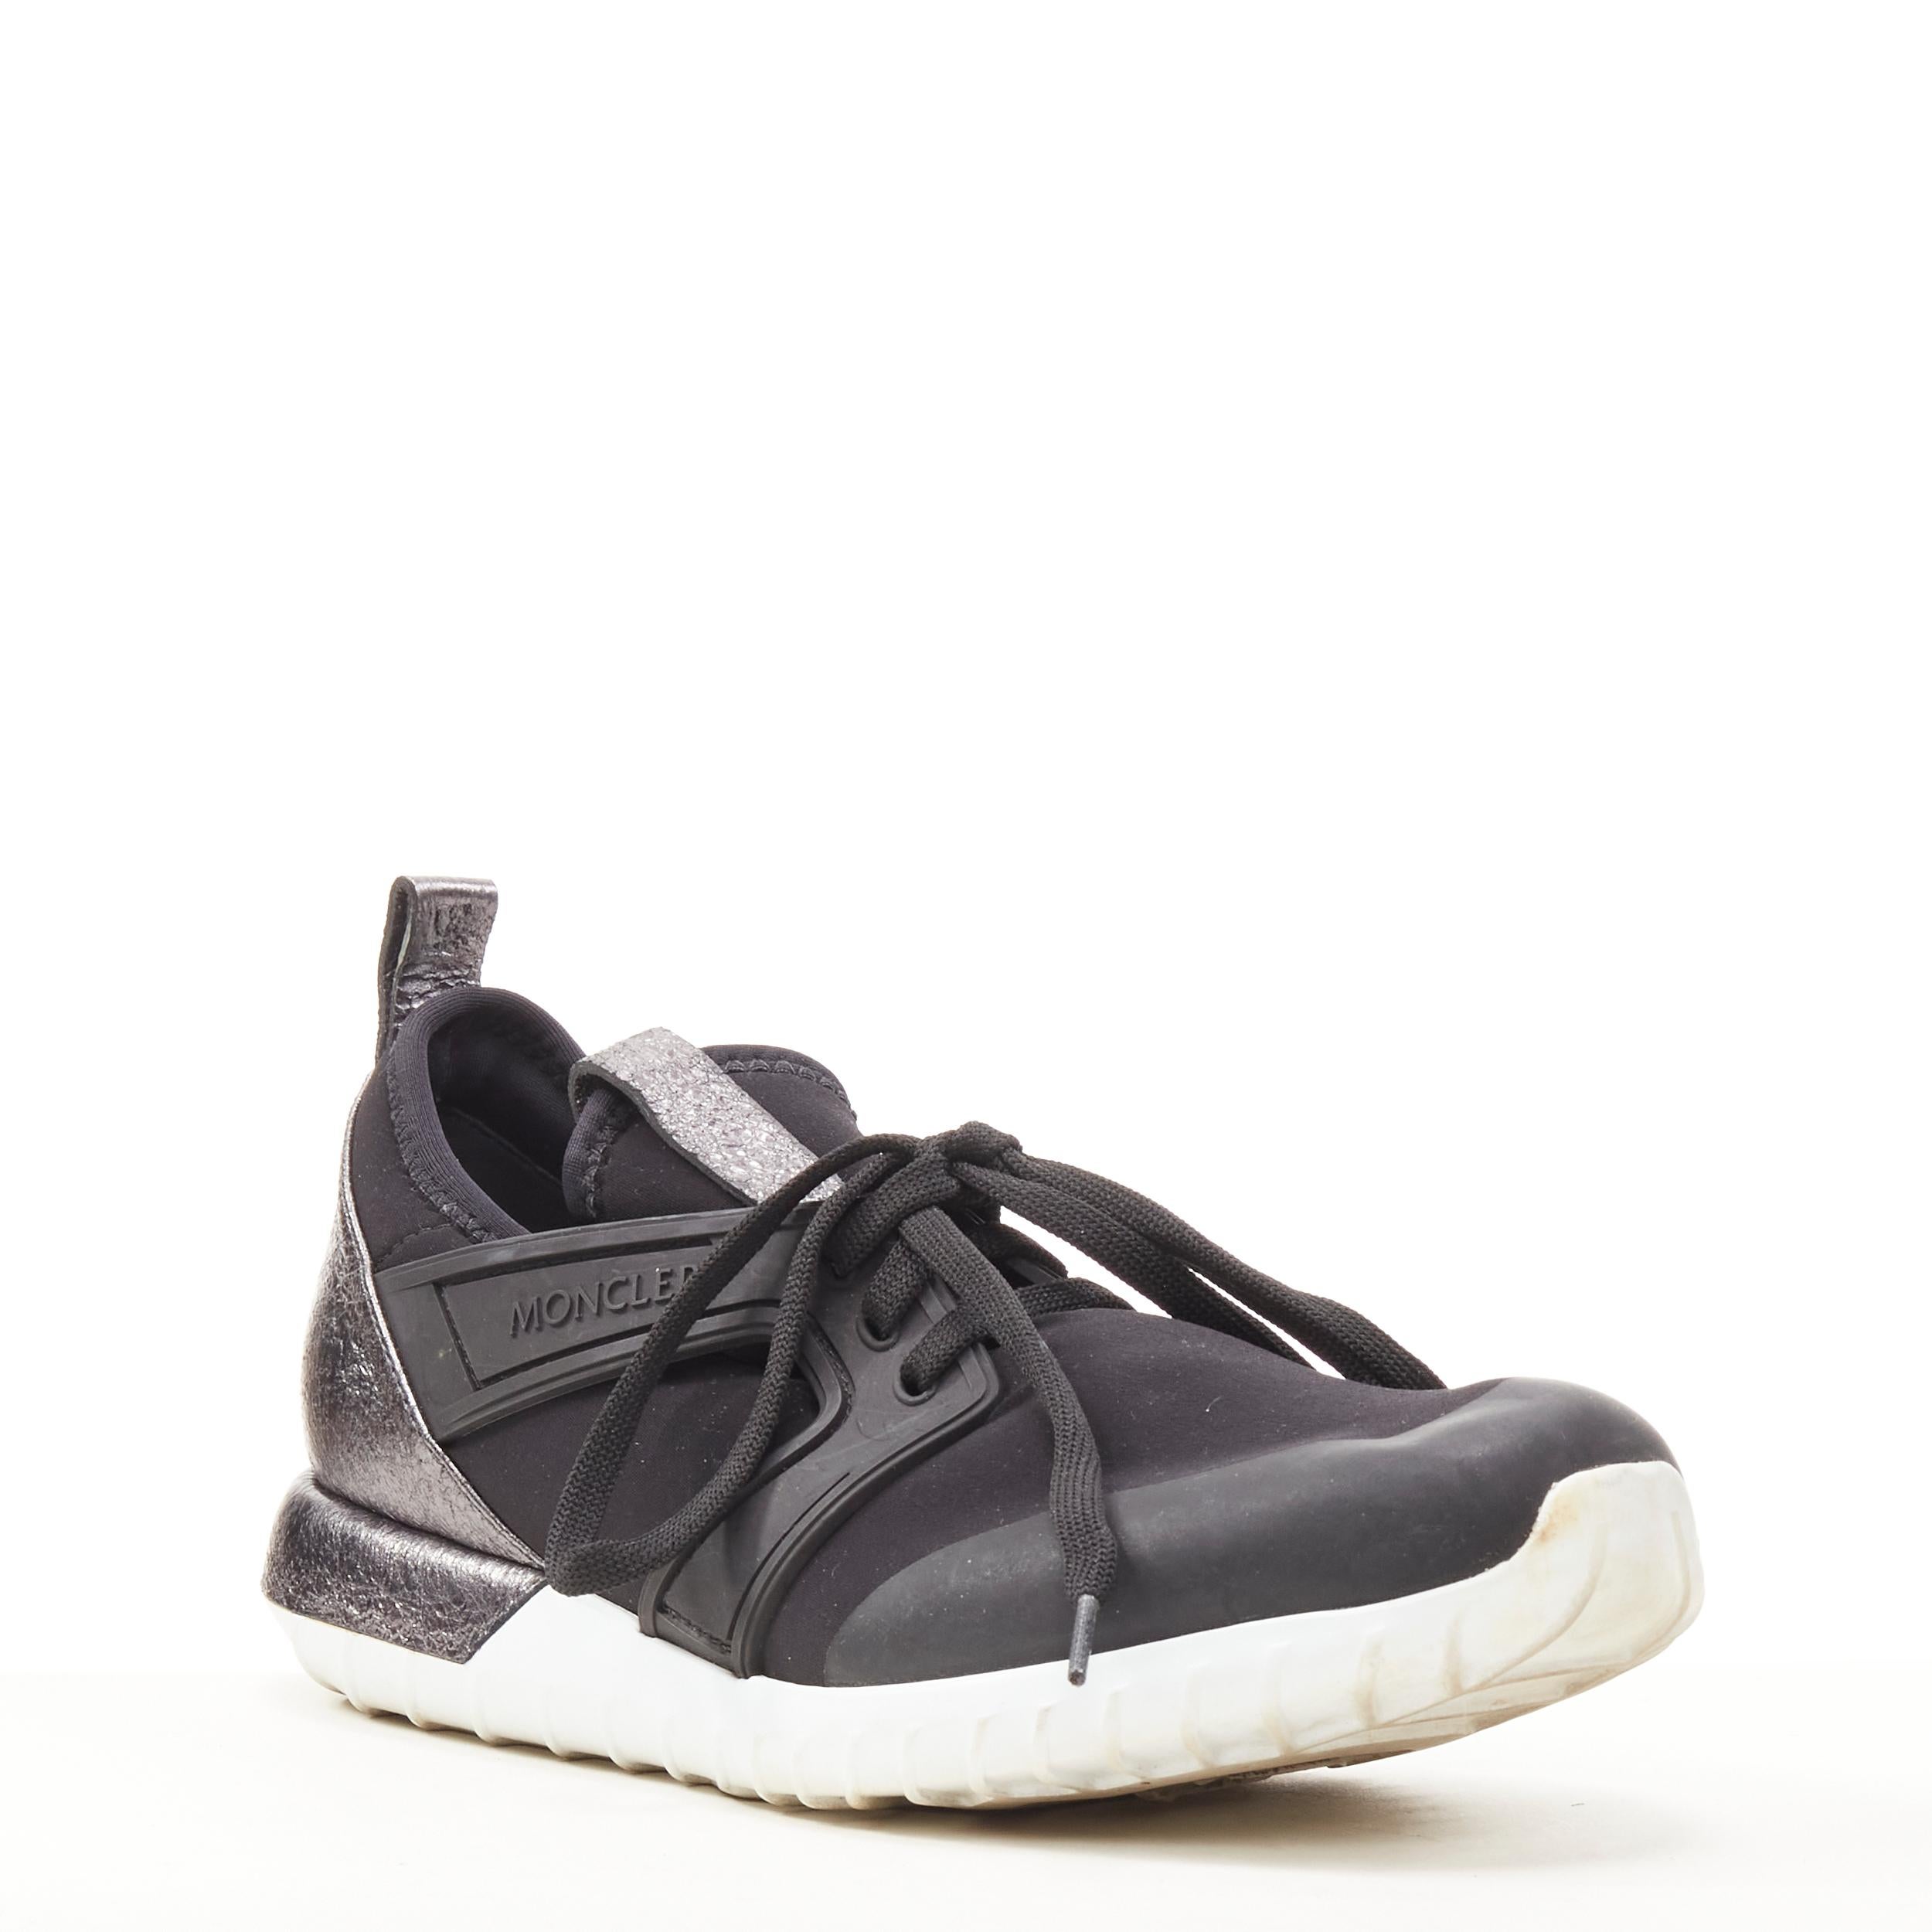 MONCLER black neoprene plastic caged metallic leather heel sports sneaker EU37 
Reference: SNKO/A00202 
Brand: Moncler 
Material: Neoprene 
Color: Black 
Pattern: Solid 
Closure: Lace 
Extra Detail: Neoprene upper. Moncler signed caged outer. Lace